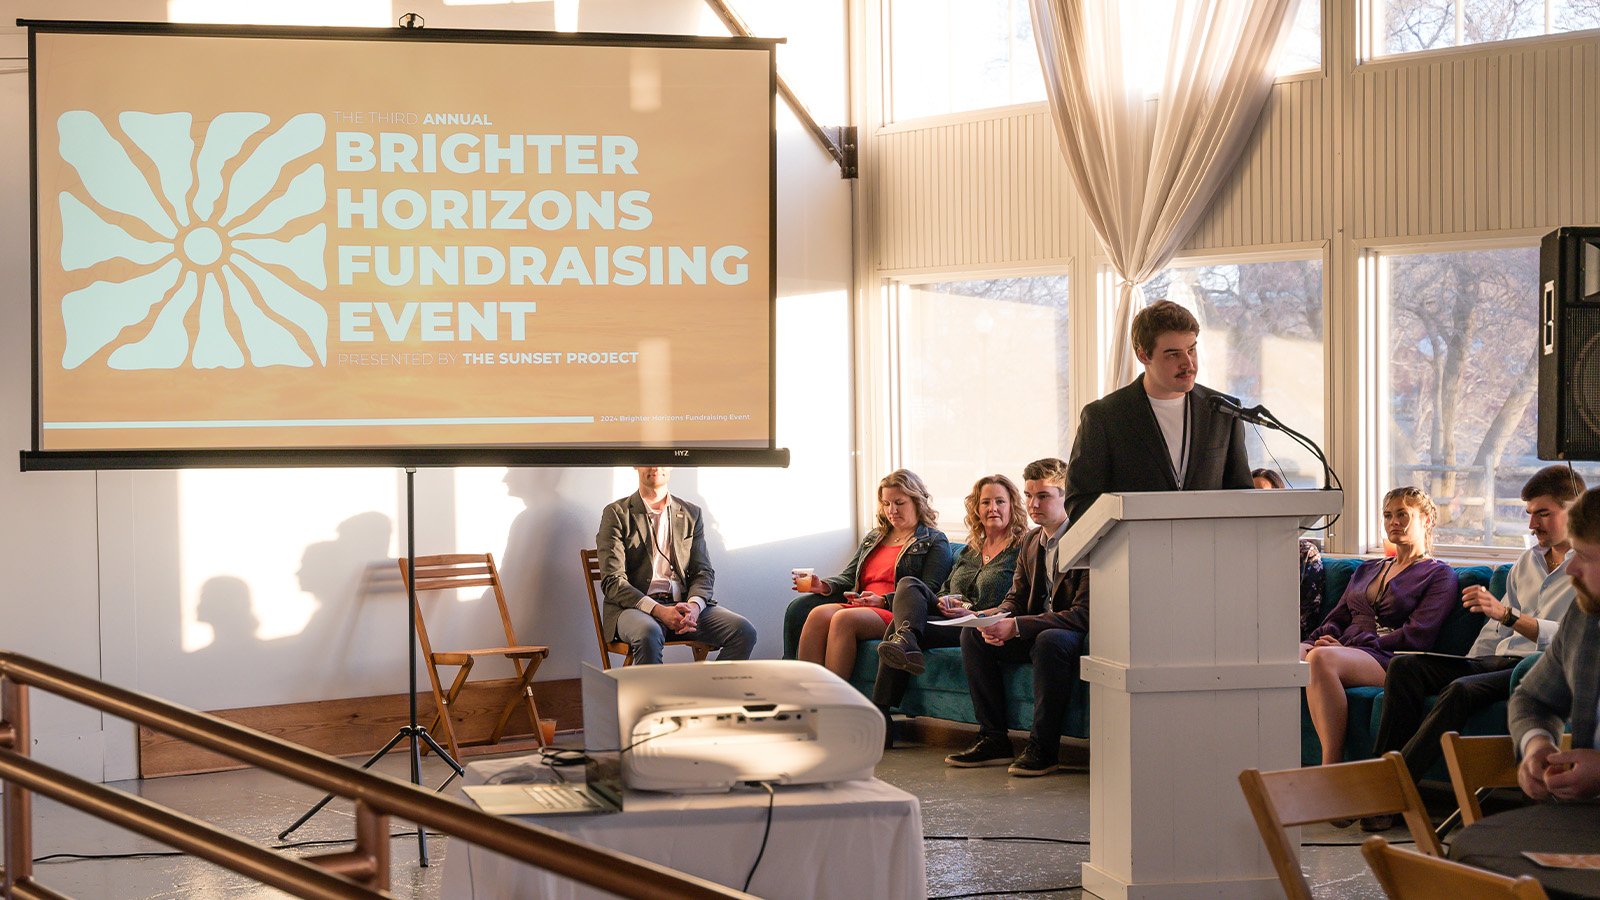 A young man with brown hair and a mustache speaks behind a white podium with a group of people behind him on a couch. A sign over his shoulder reads Brighter Horizons Fundraising Event.